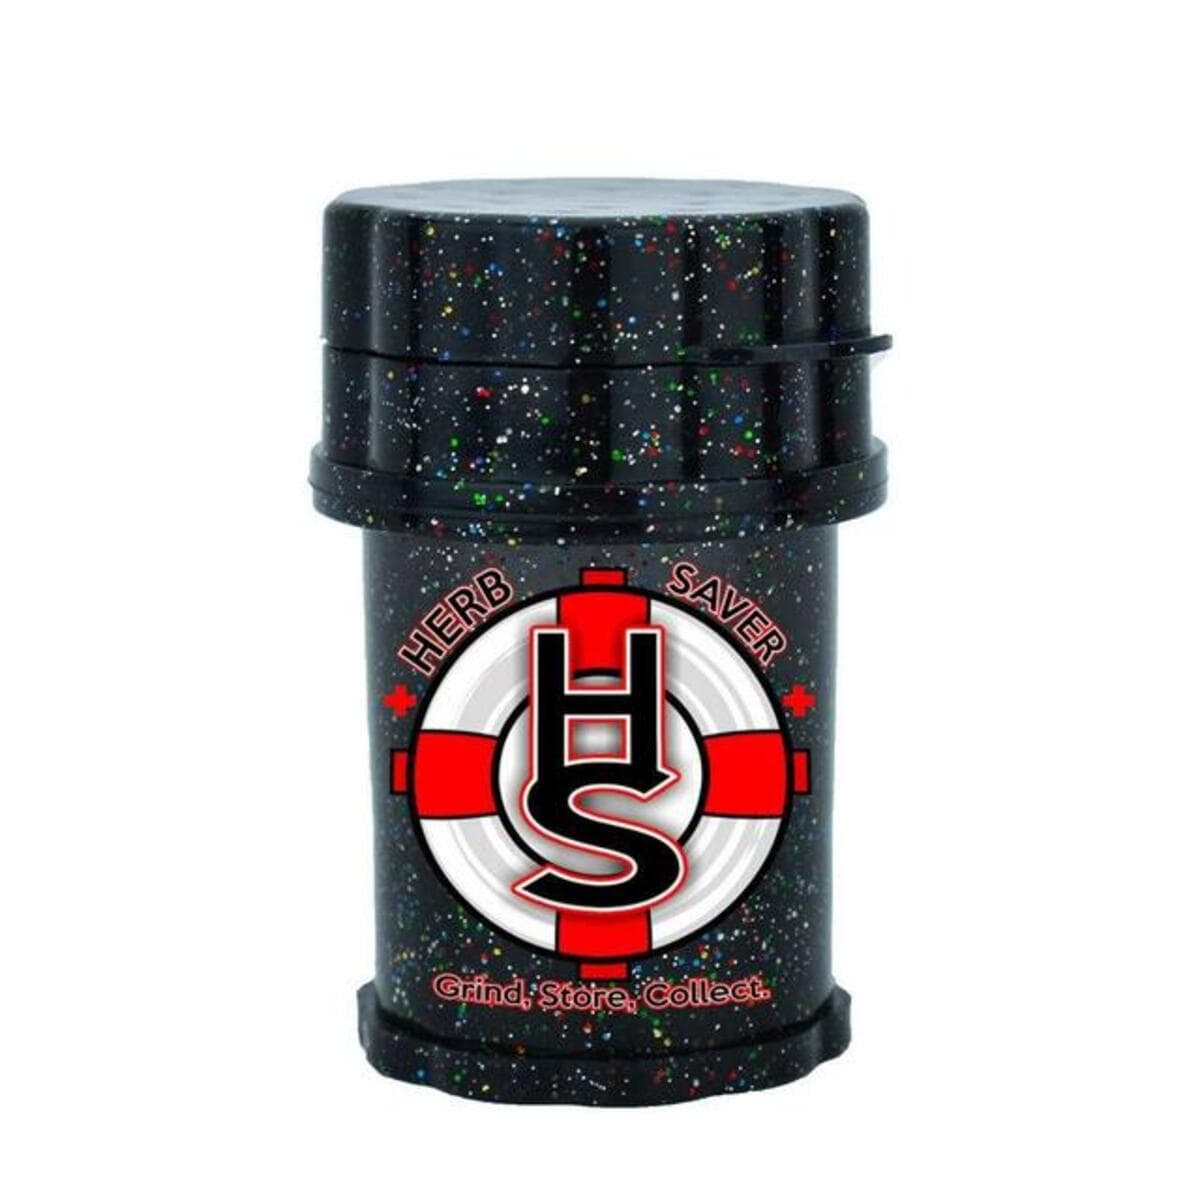 Herbsaver Grinder Knotted Letters / Galaxy Black Mini Daily High Club x Herbsaver Grinder